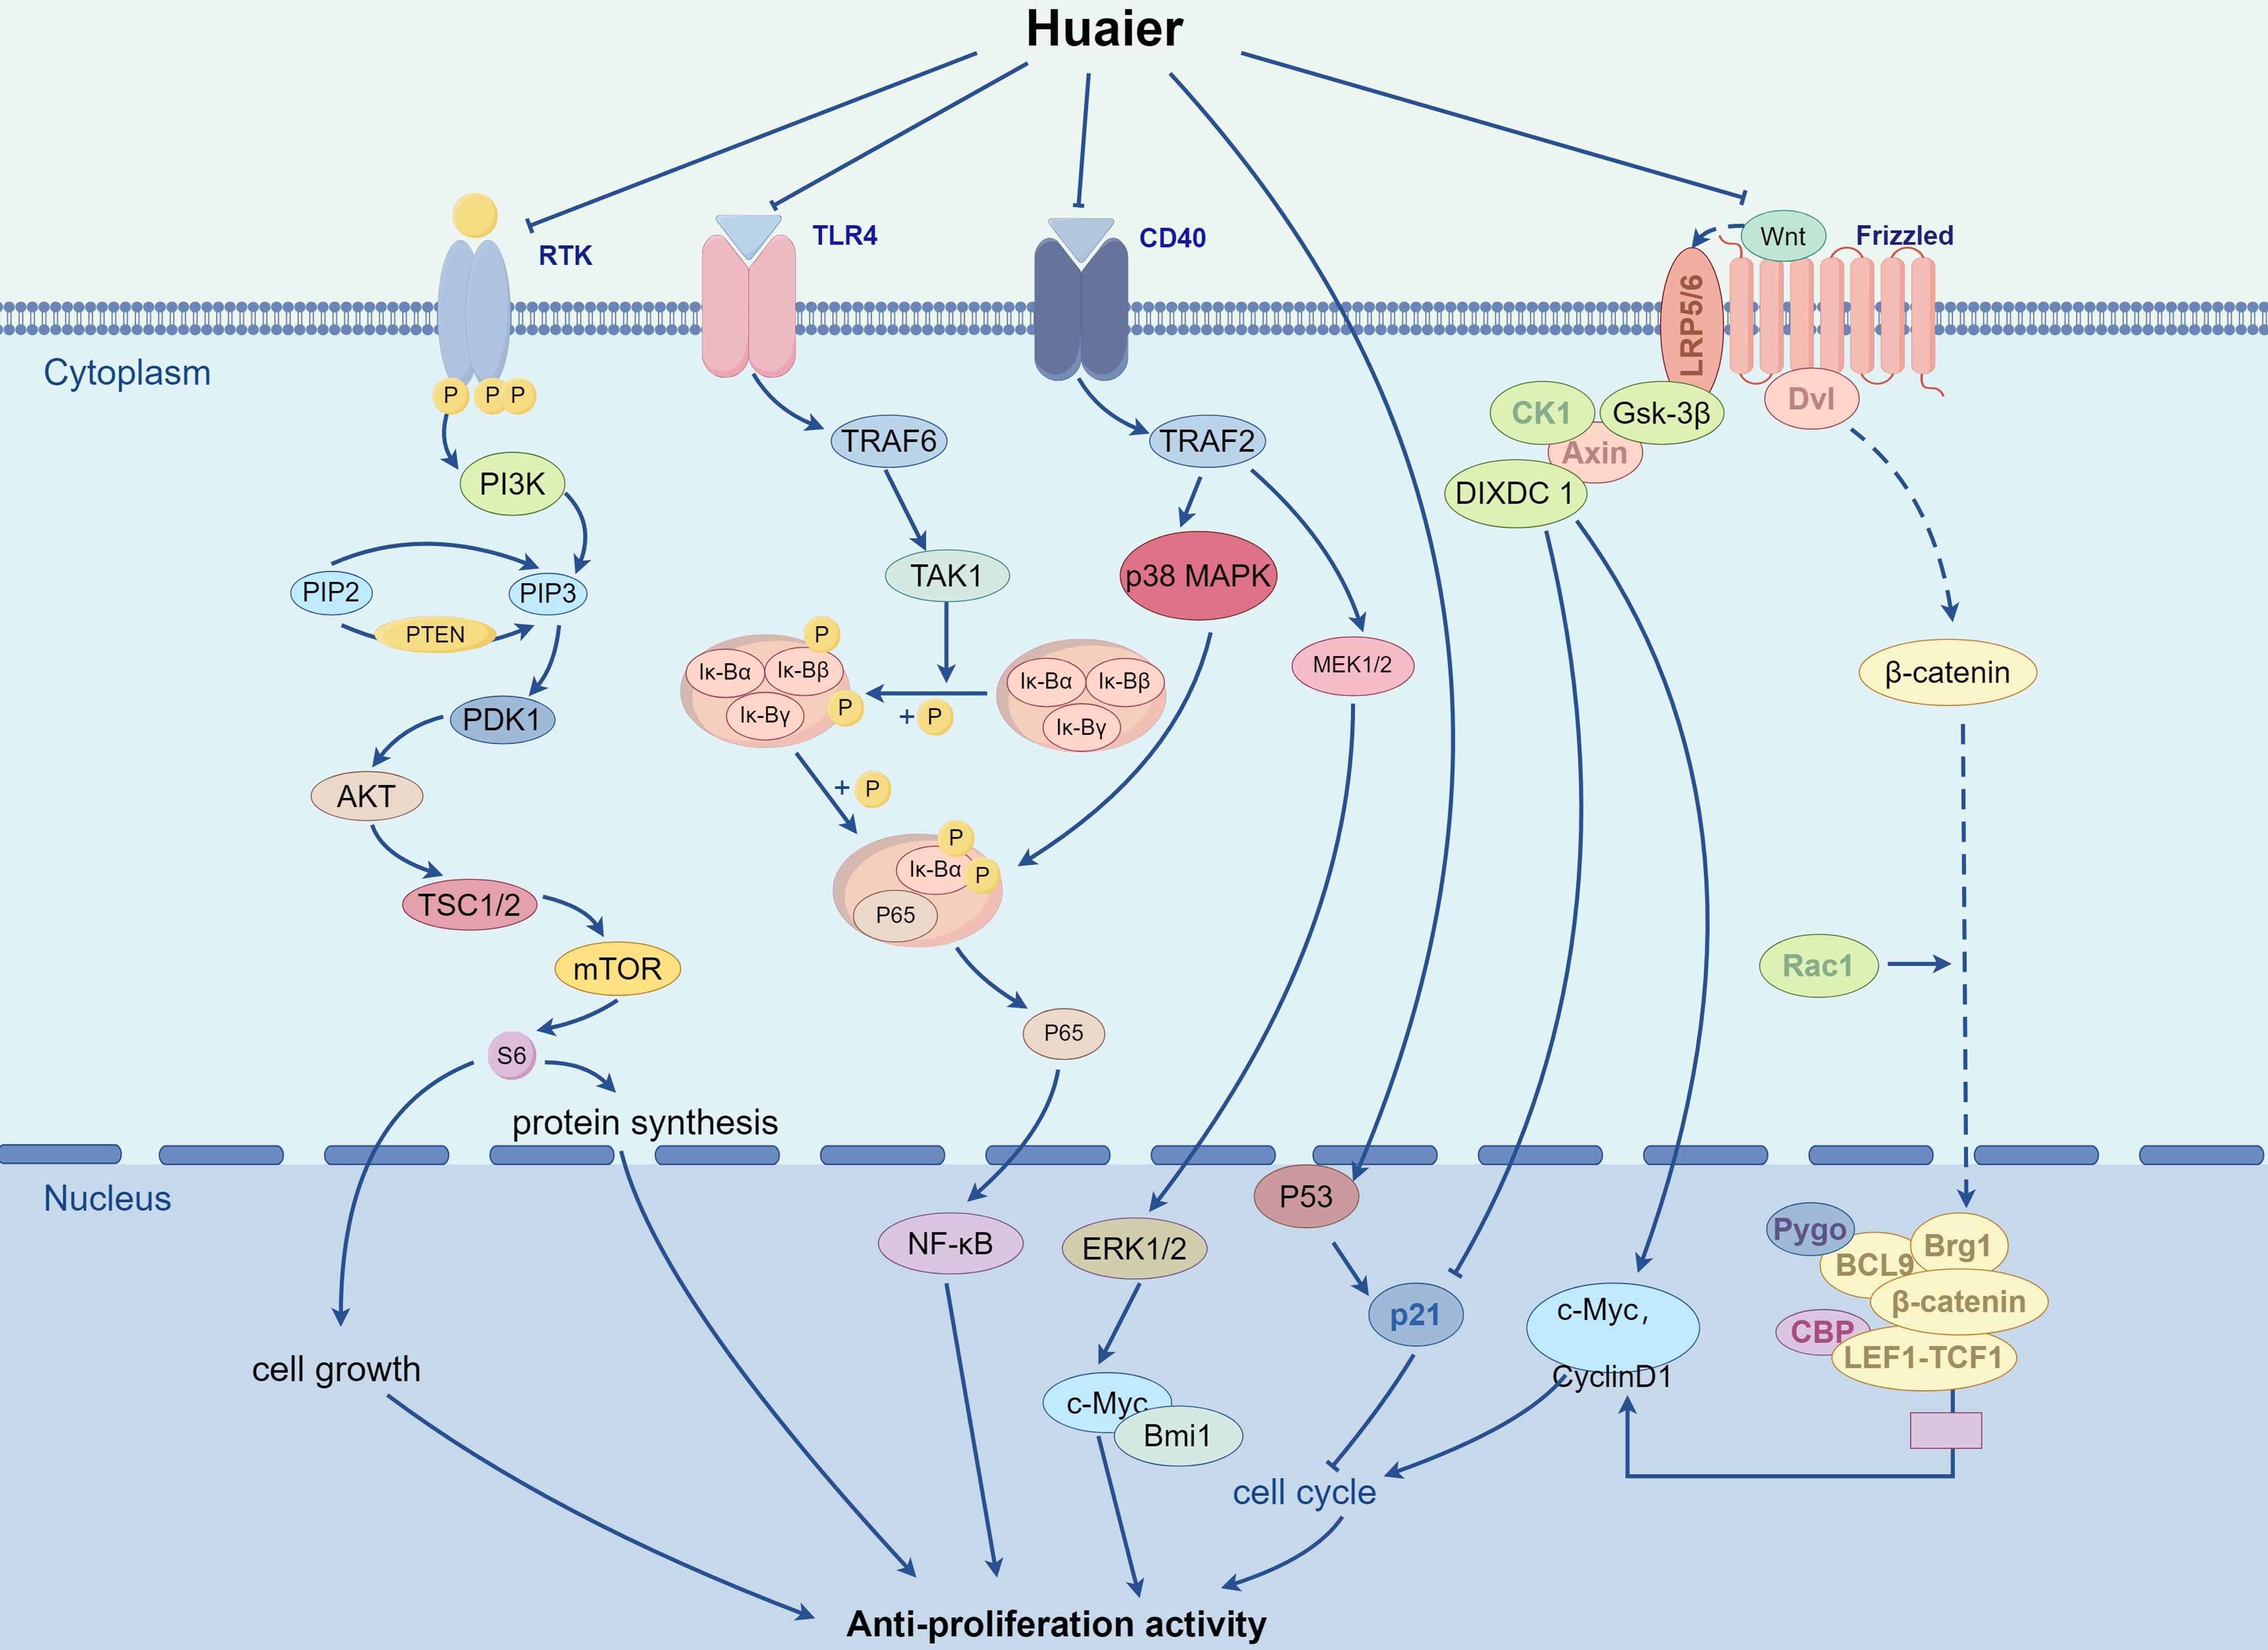 Mechanism of Huaier inhibiting cell proliferation.